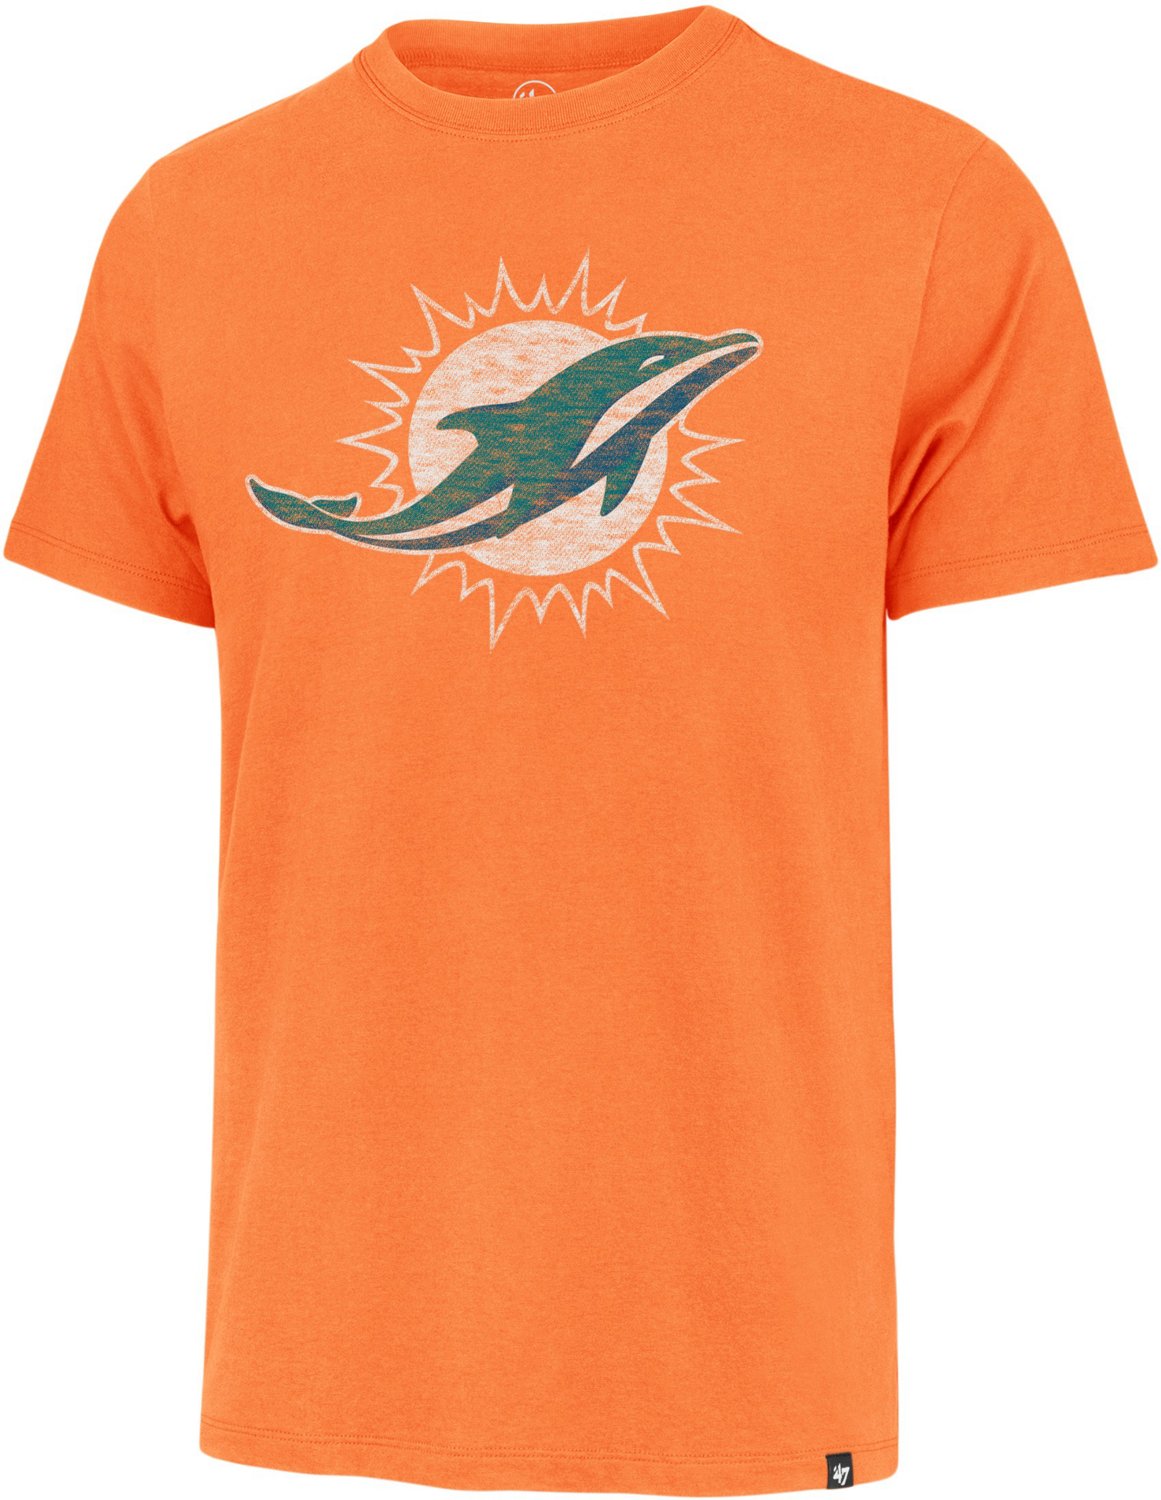 Miami Dolphins Clothing | Academy